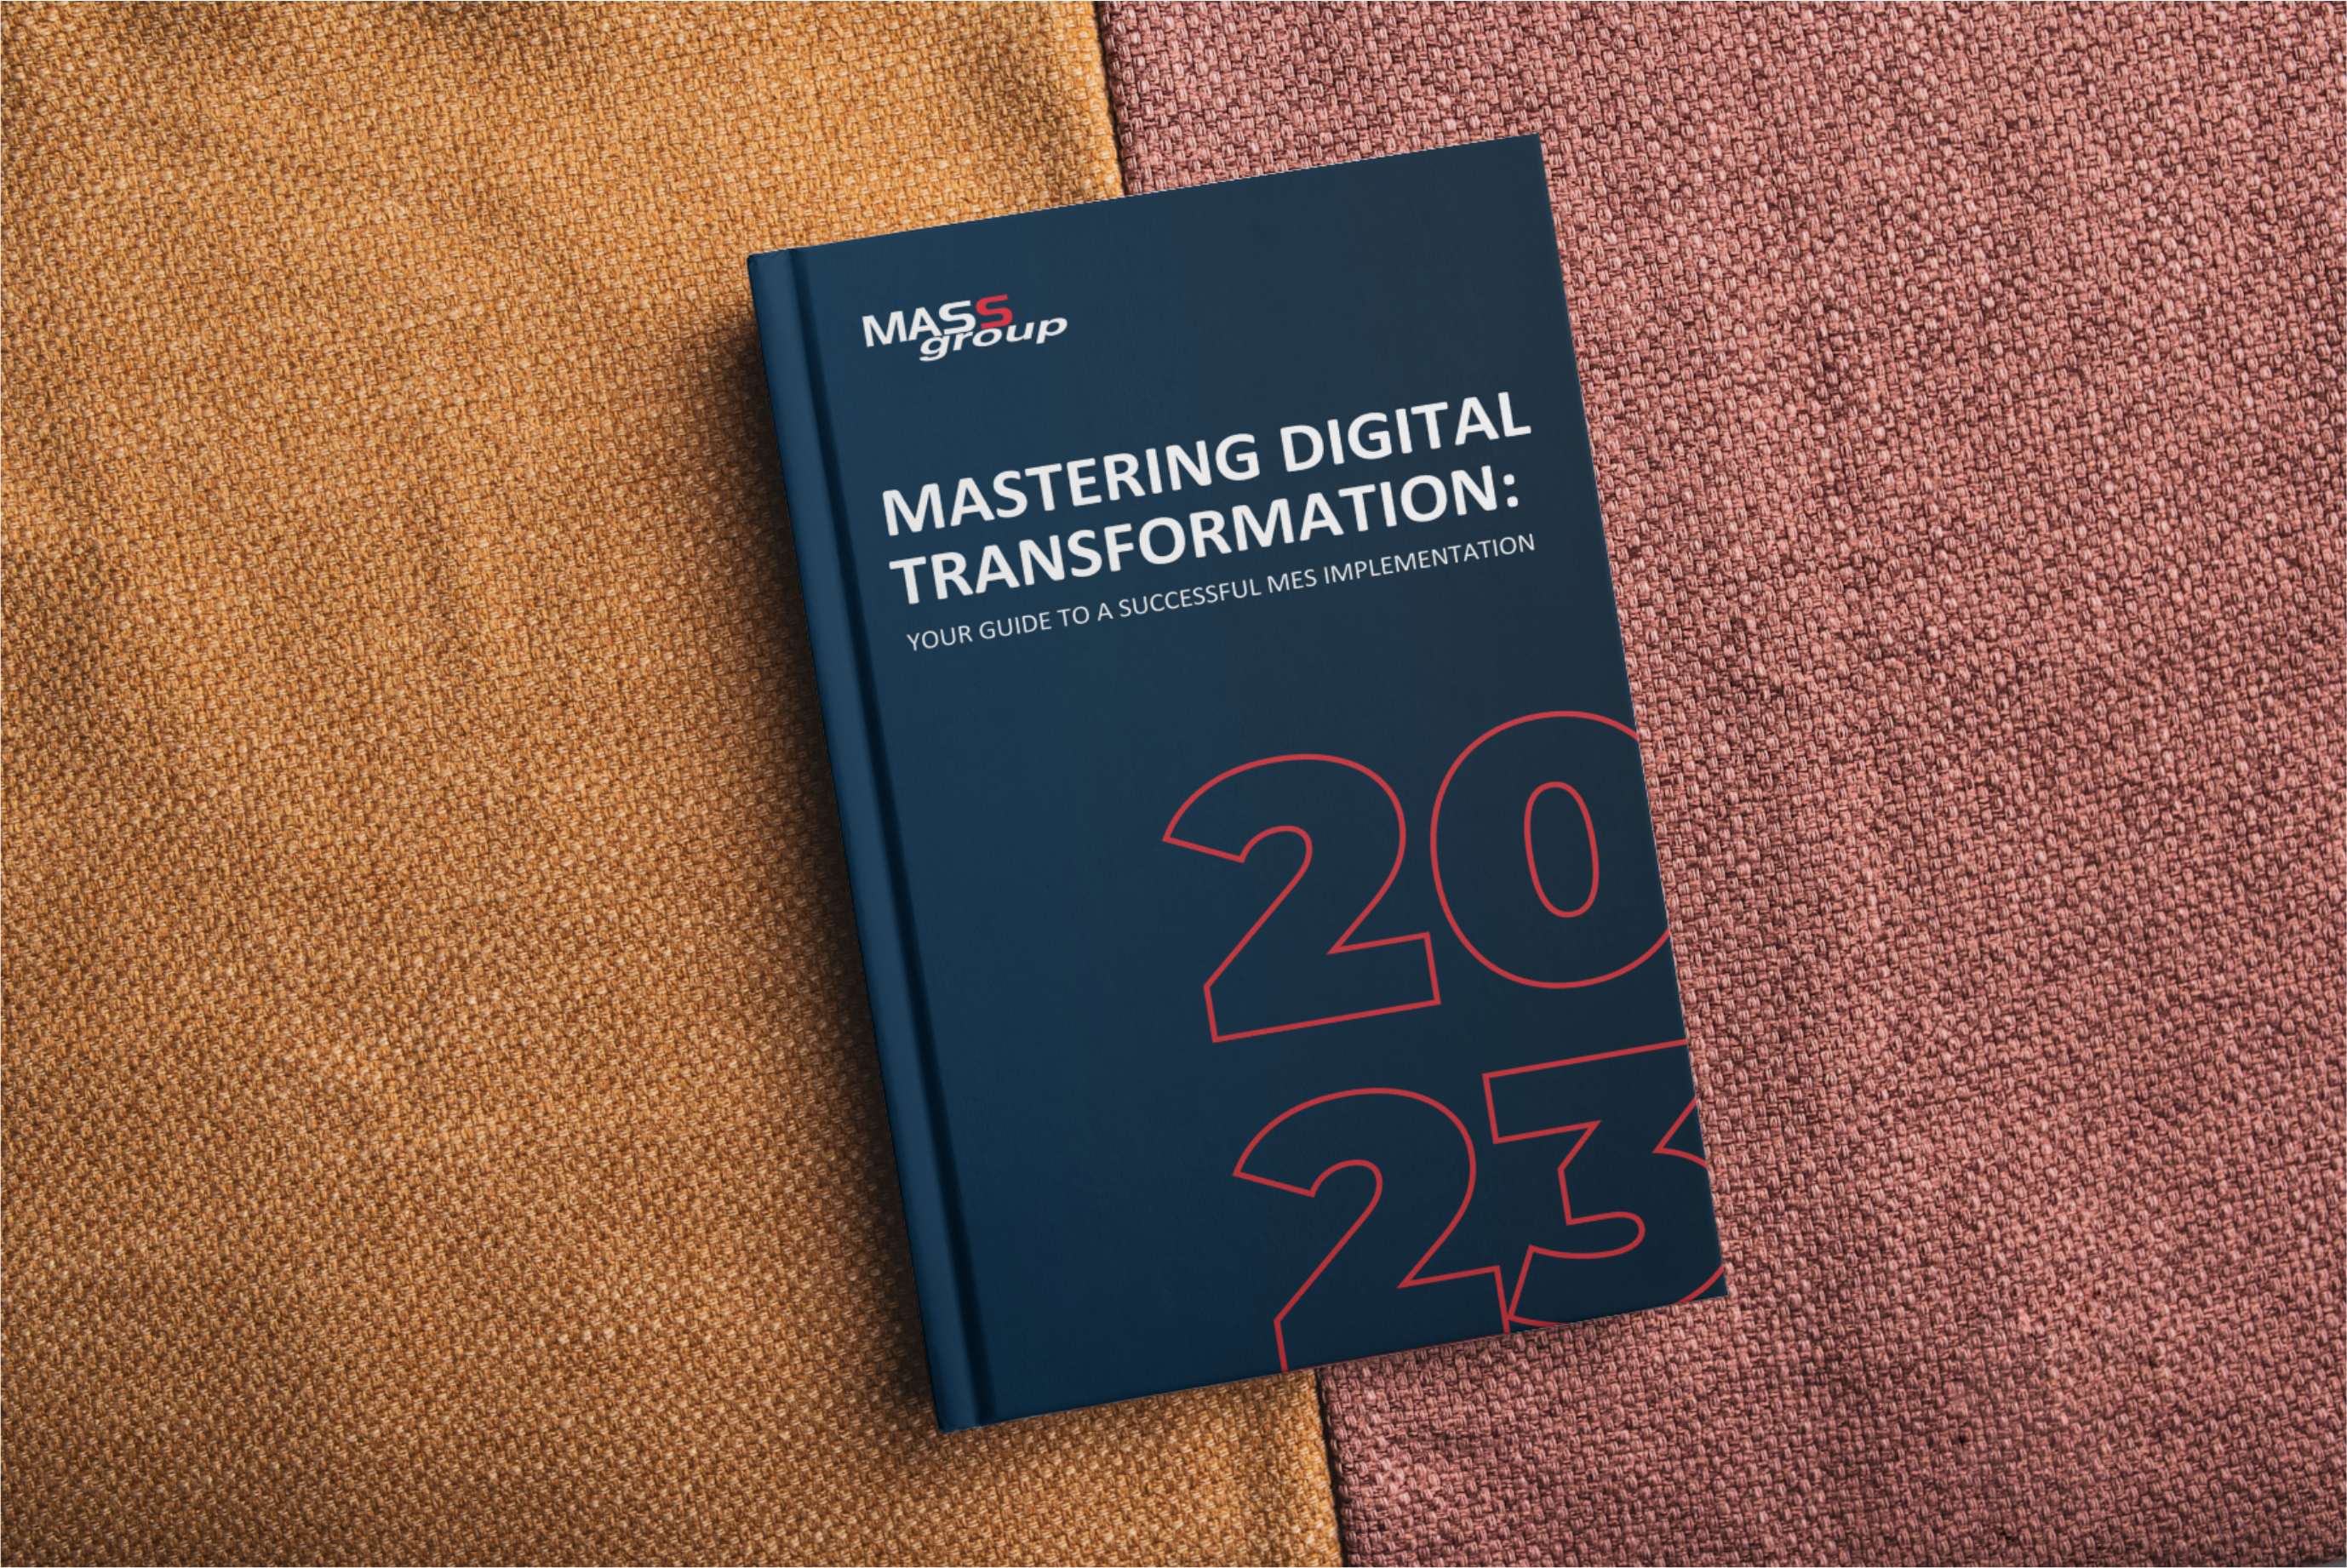 Cover of MASS Group's 2023 guidebook titled 'Mastering Digital Transformation: Your Guide to a Successful MES Implementation' placed on a textured surface